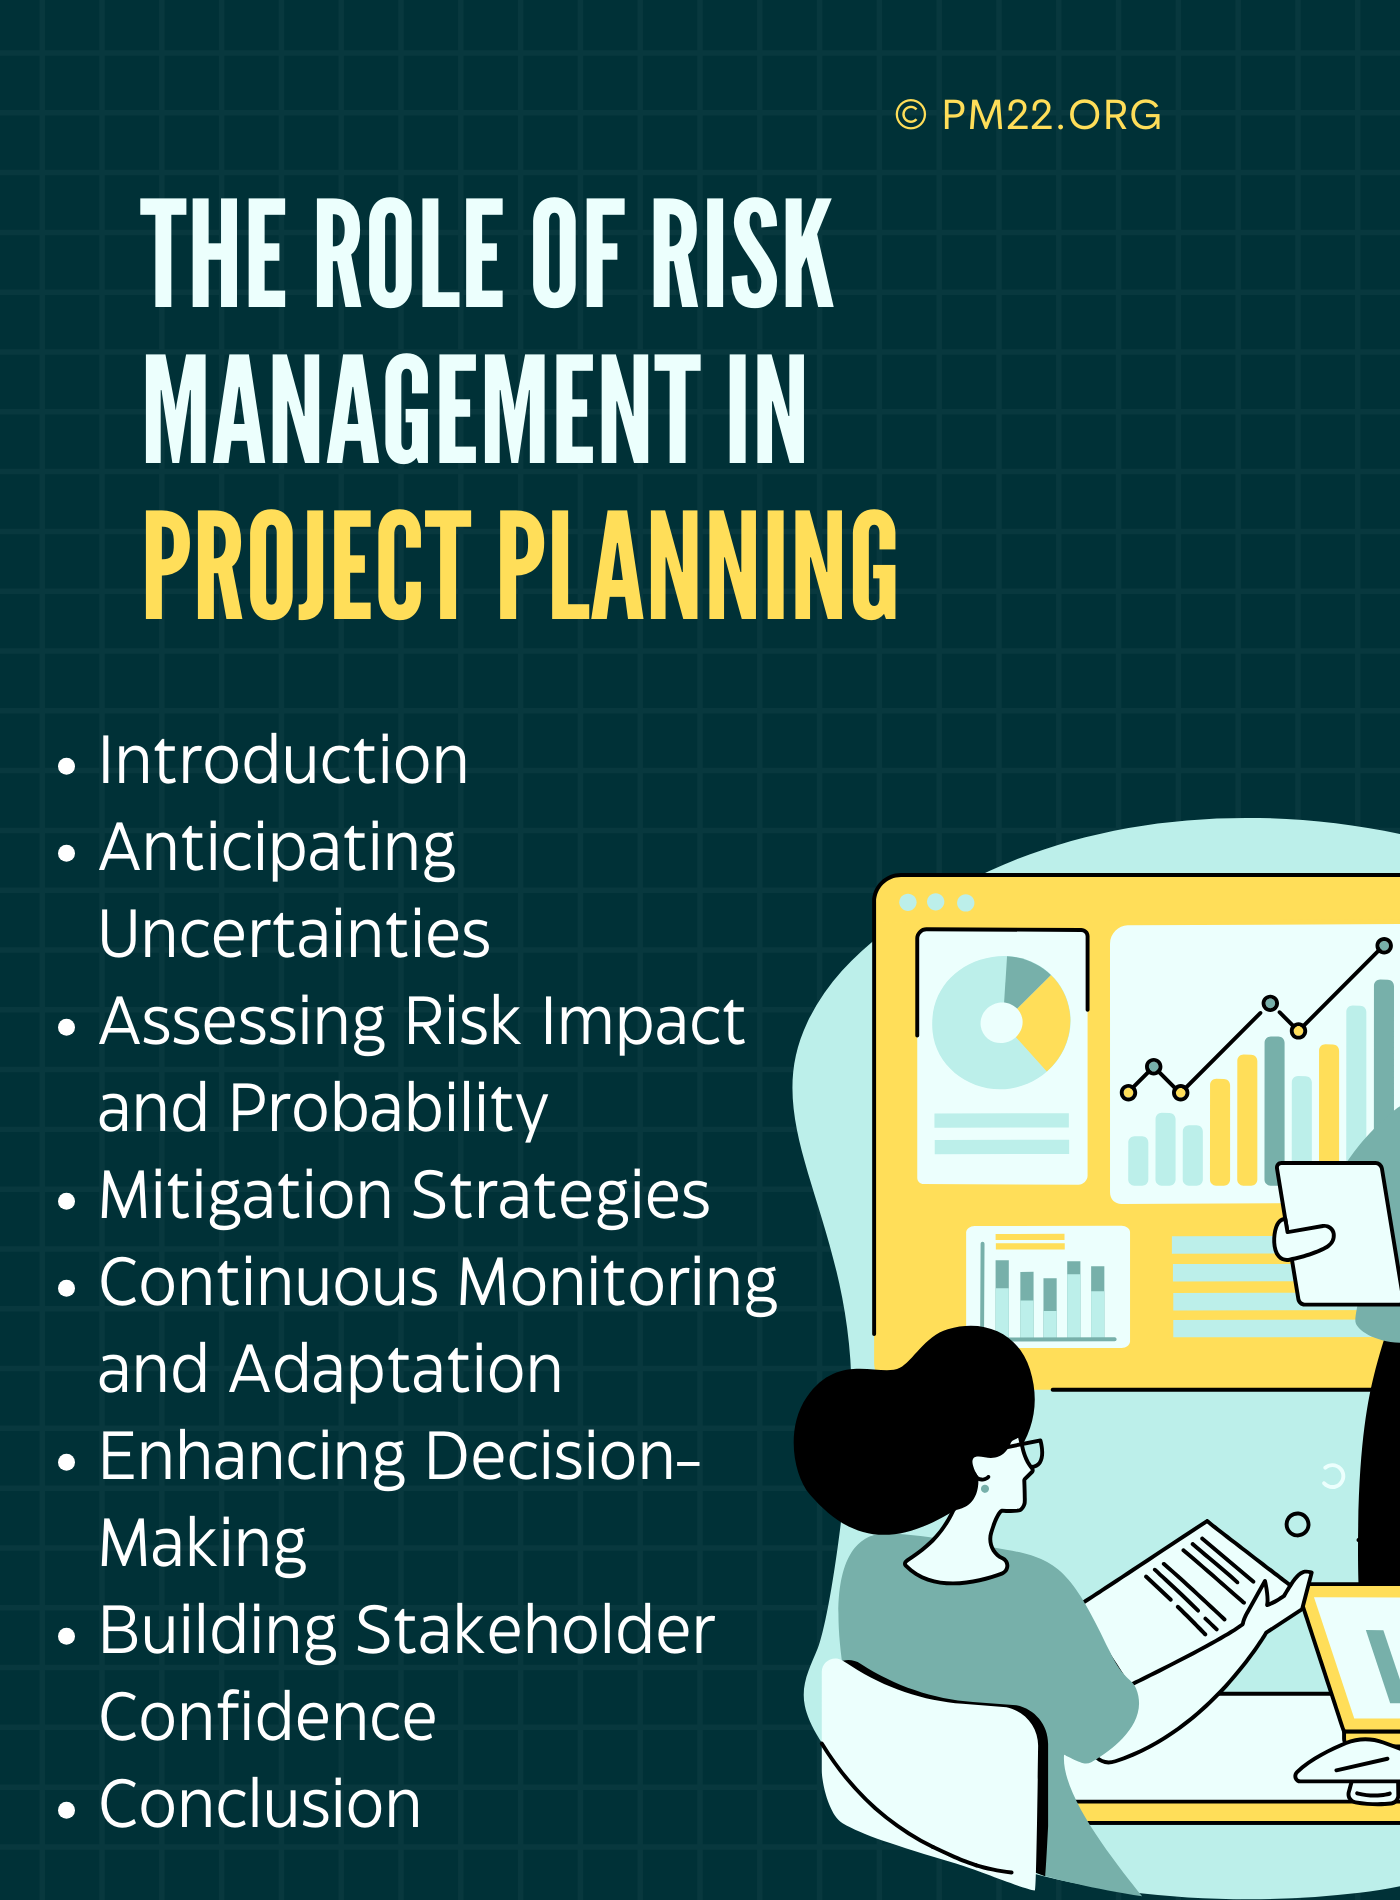 The Role of Risk Management in Project Planning